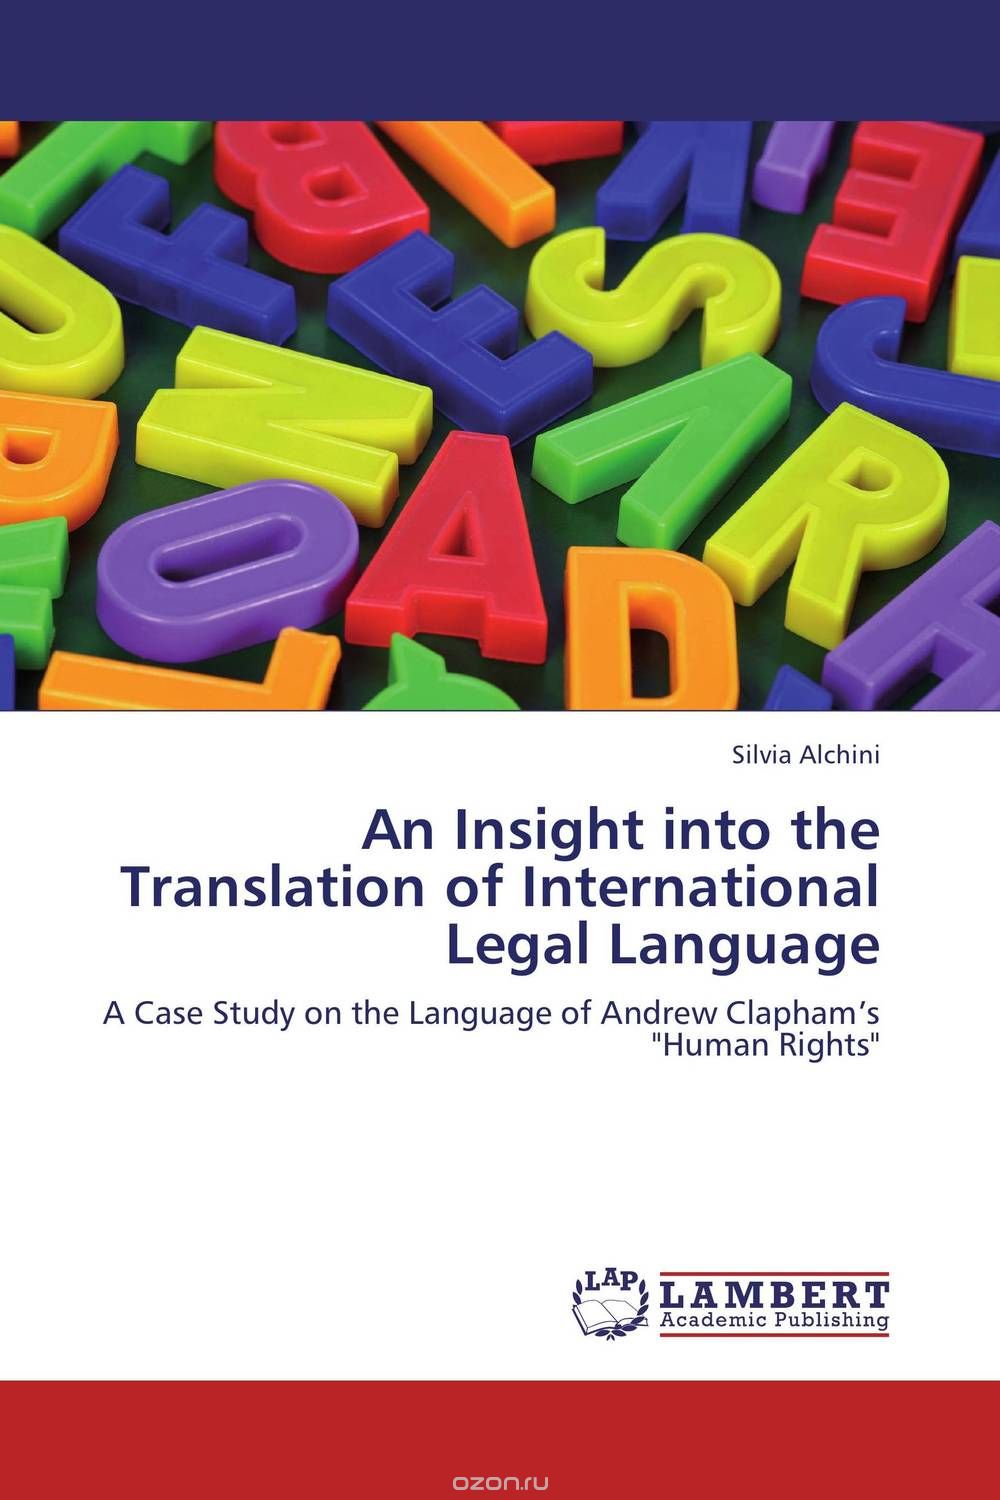 An Insight into the Translation of International Legal Language